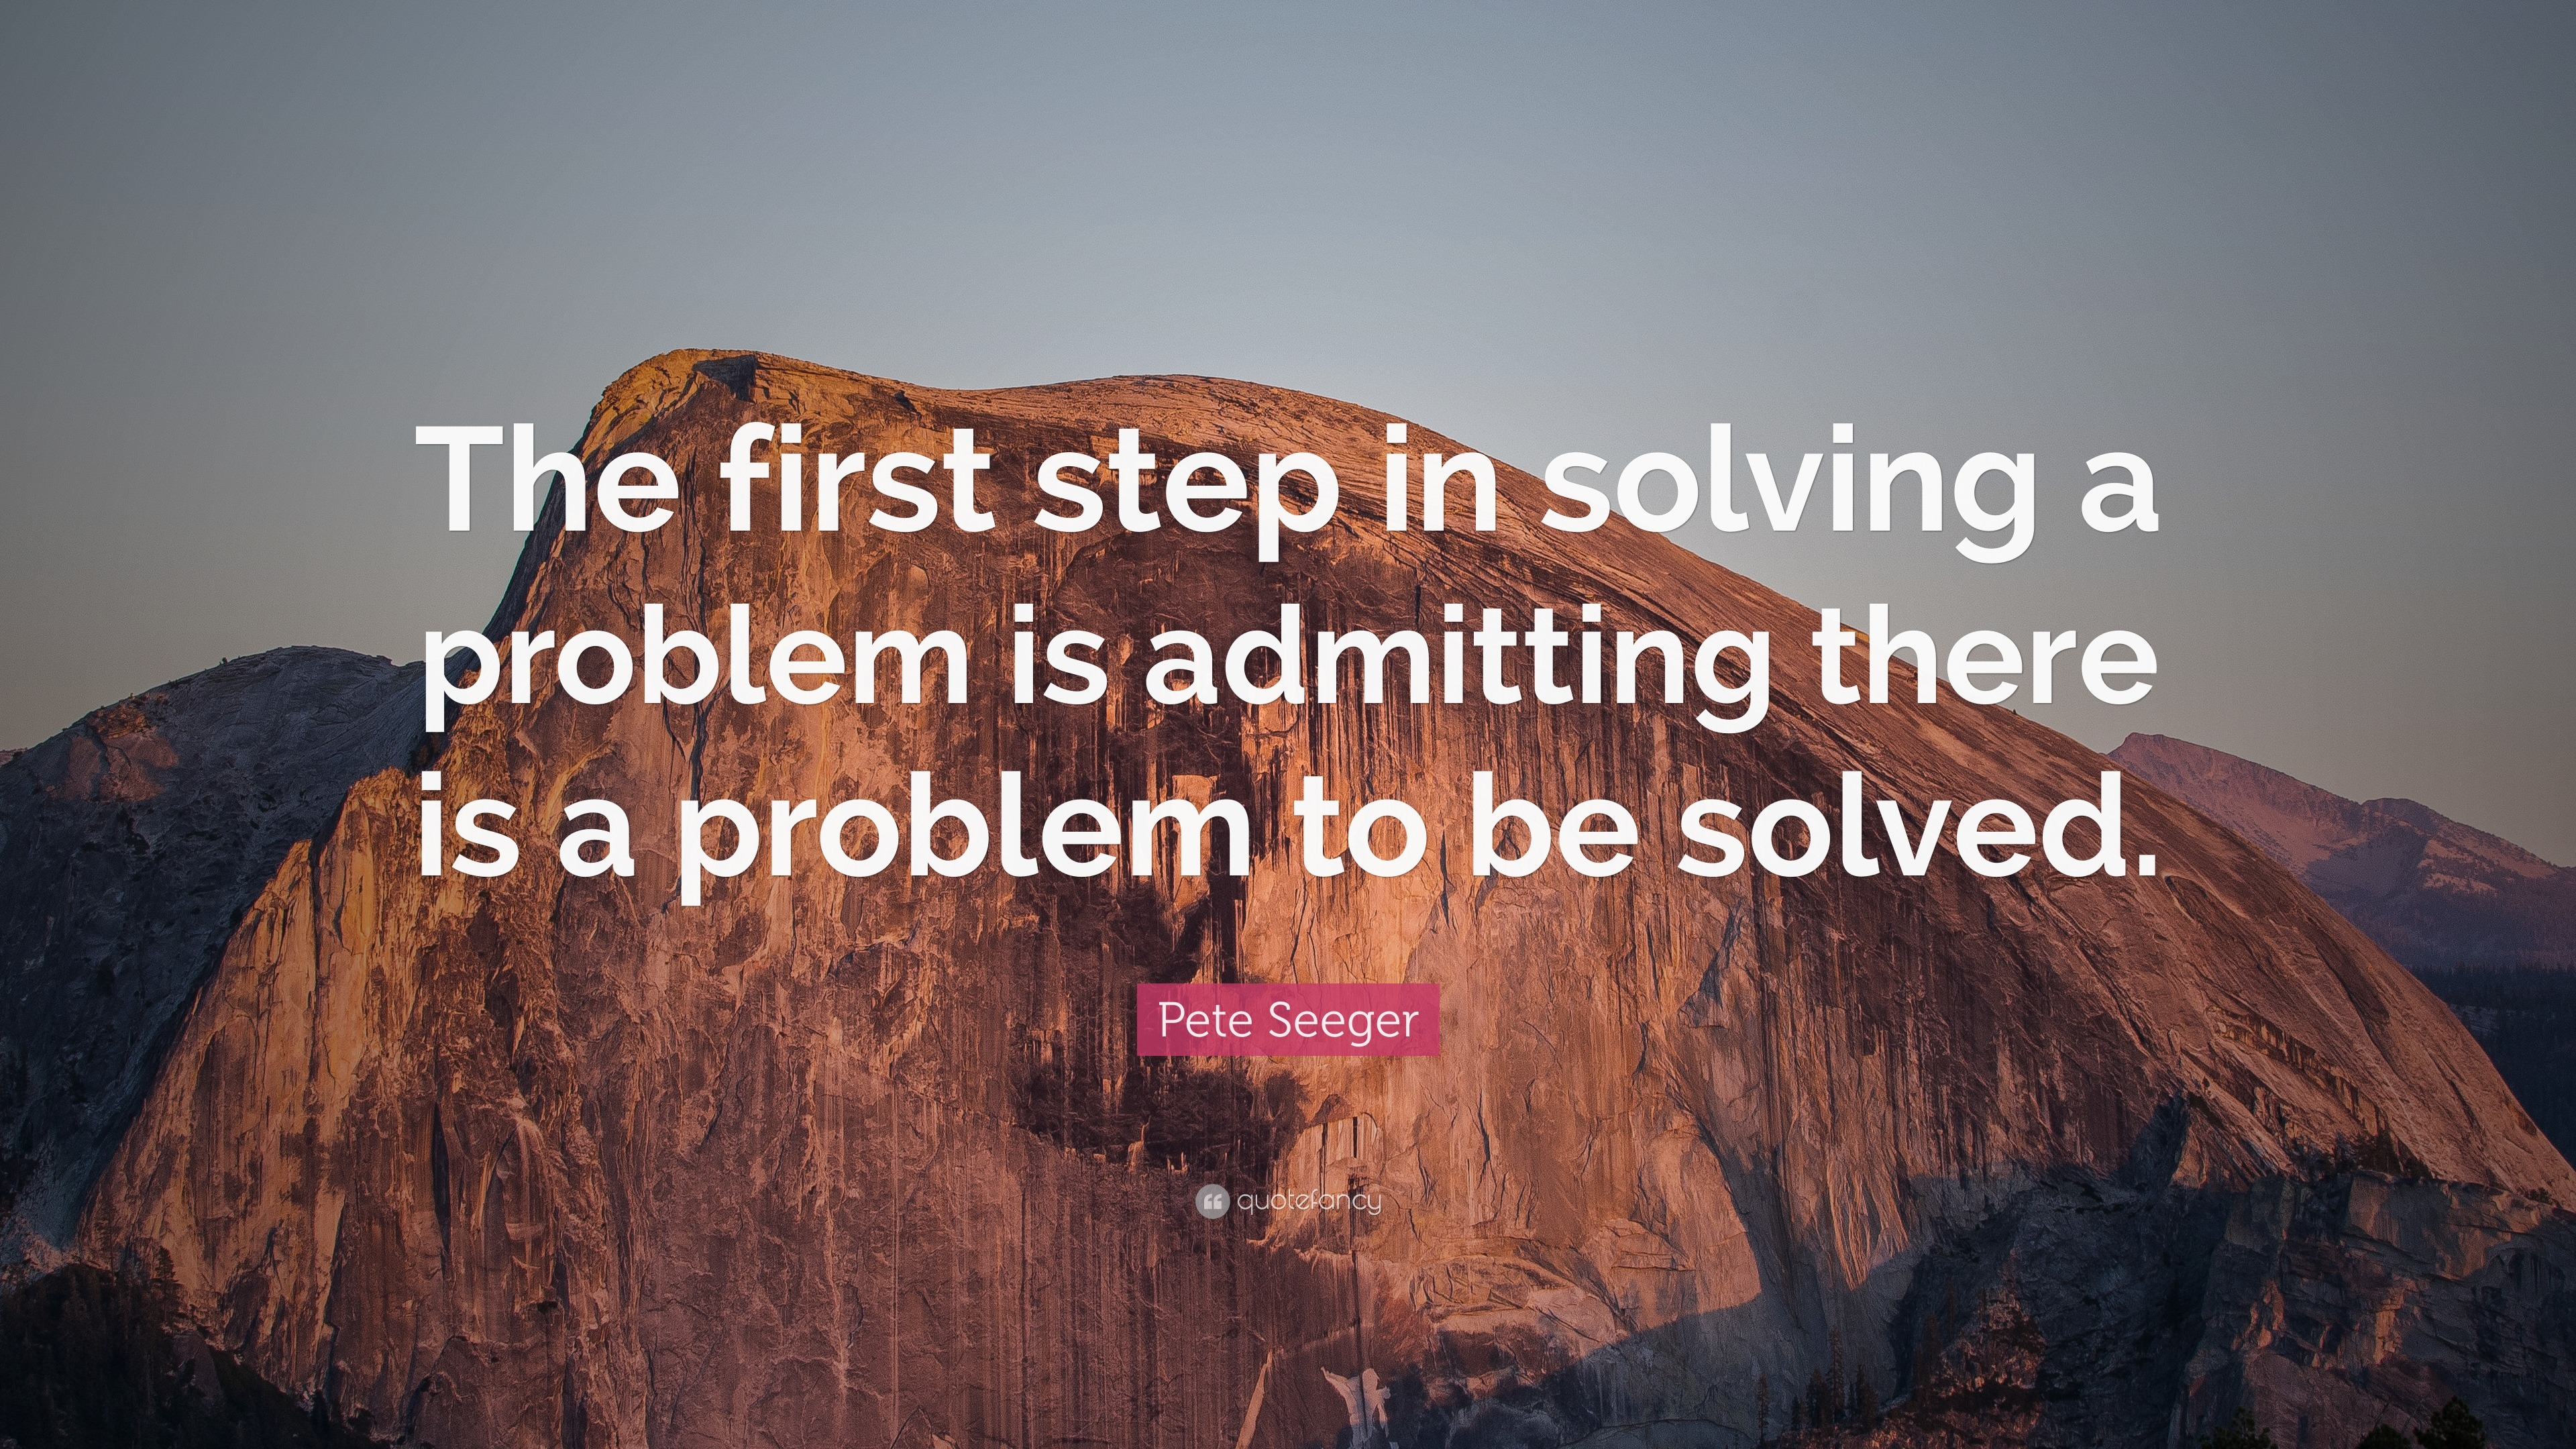 what was the first step in problem solving